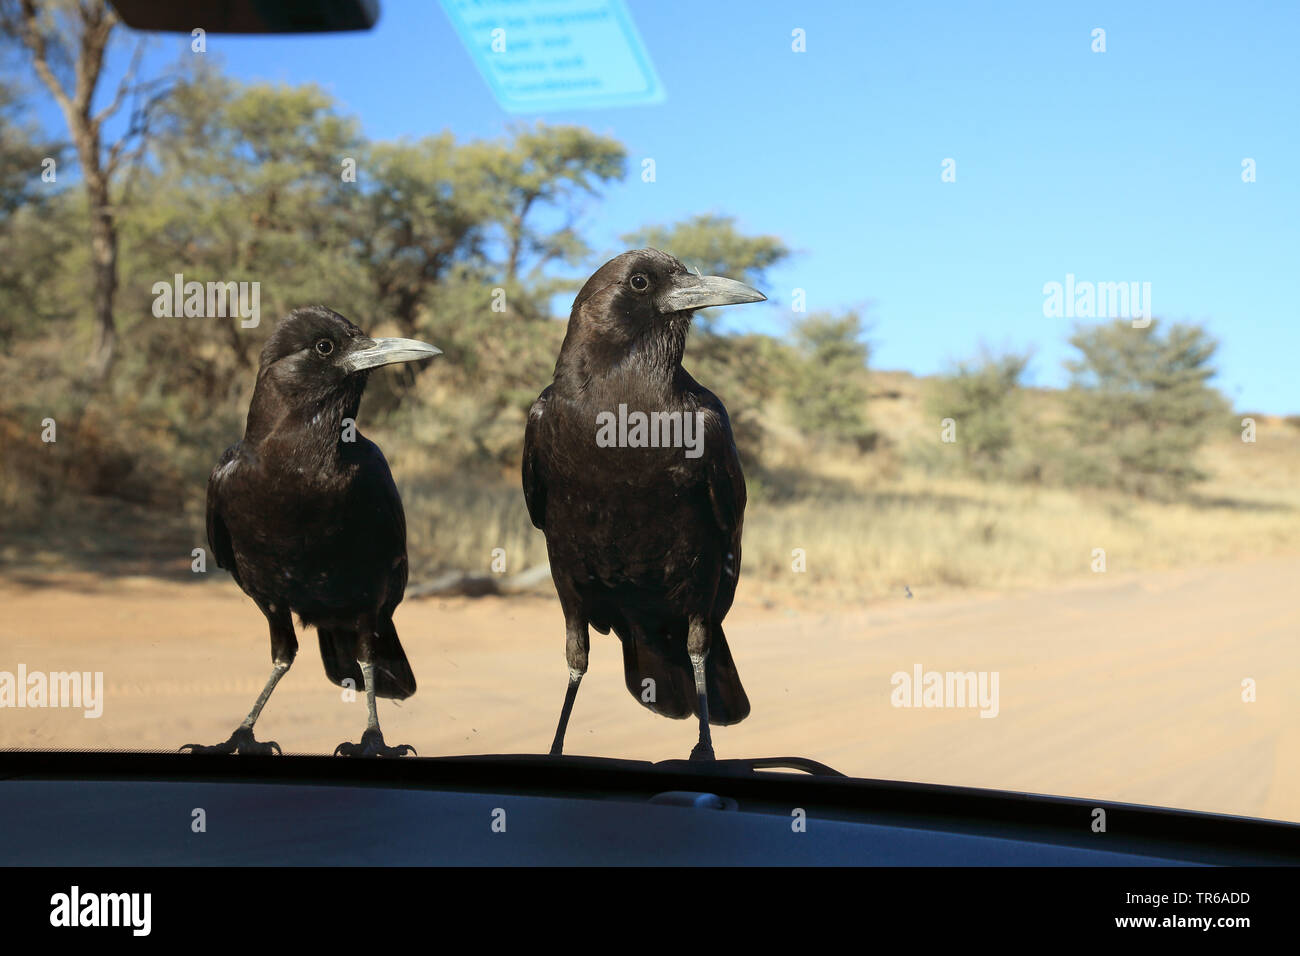 Black crow (Corvus capensis), pair sitting in front of a windscreen on the bonnet of a car, Kgalagadi Transfrontier National Park Stock Photo